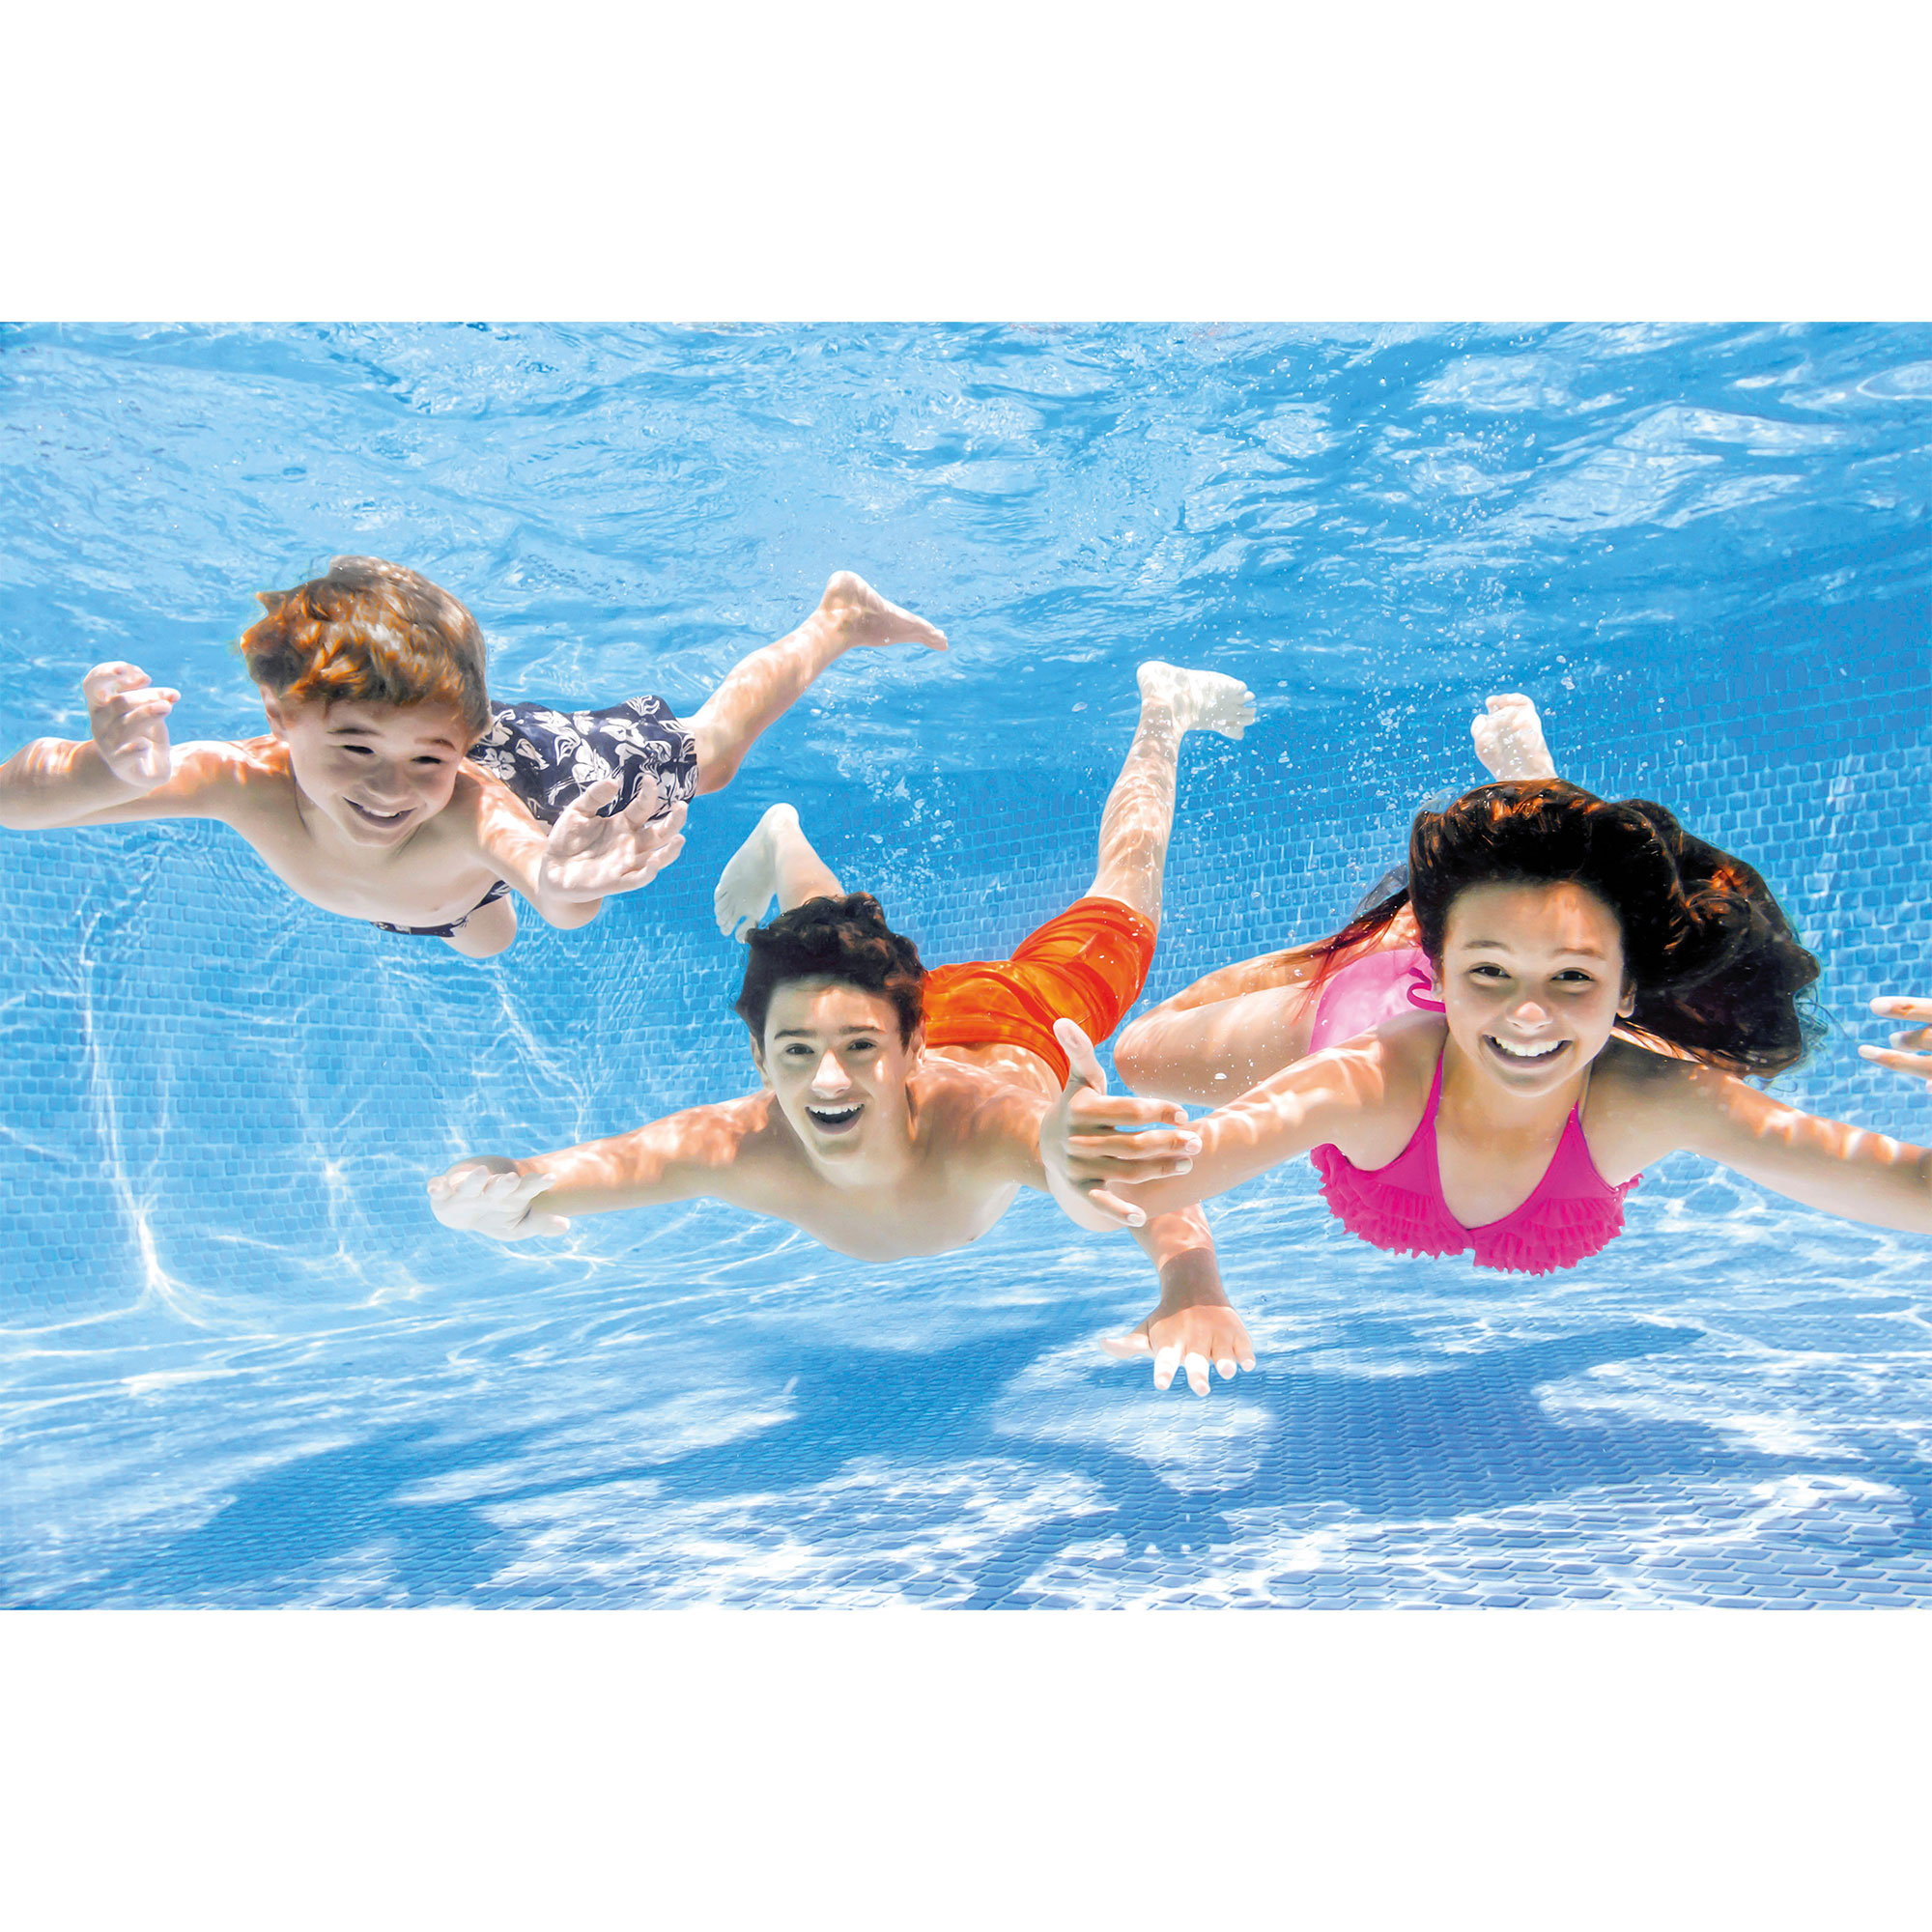 Intex 8.5ft x 26in Rectangular Frame Above Ground Swimming Pool, Blue - image 3 of 11